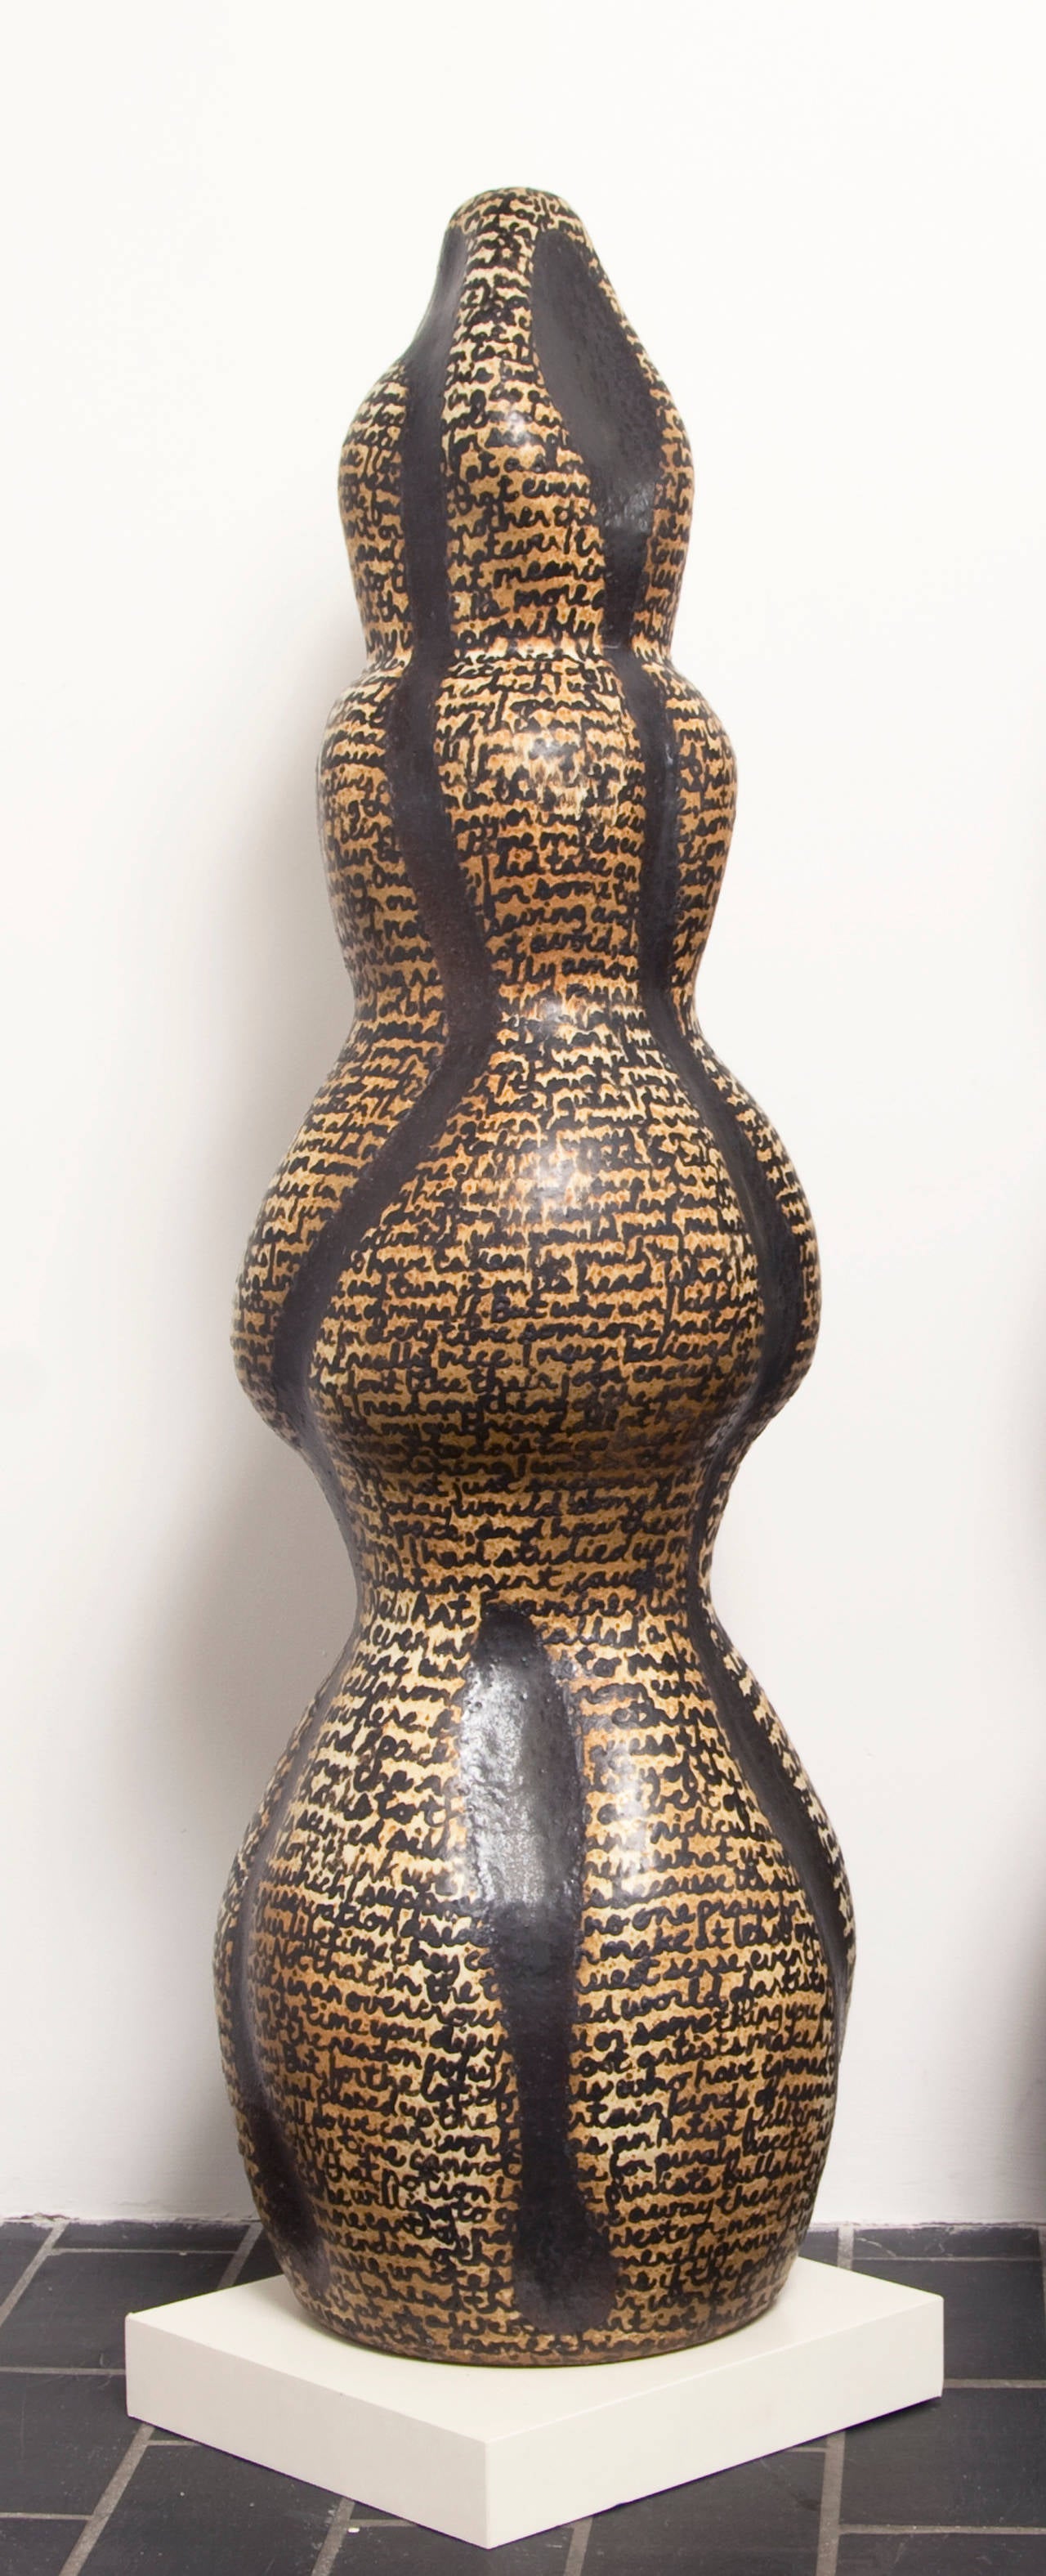 Journal Entry (2) - Sculpture by Bruce Barry